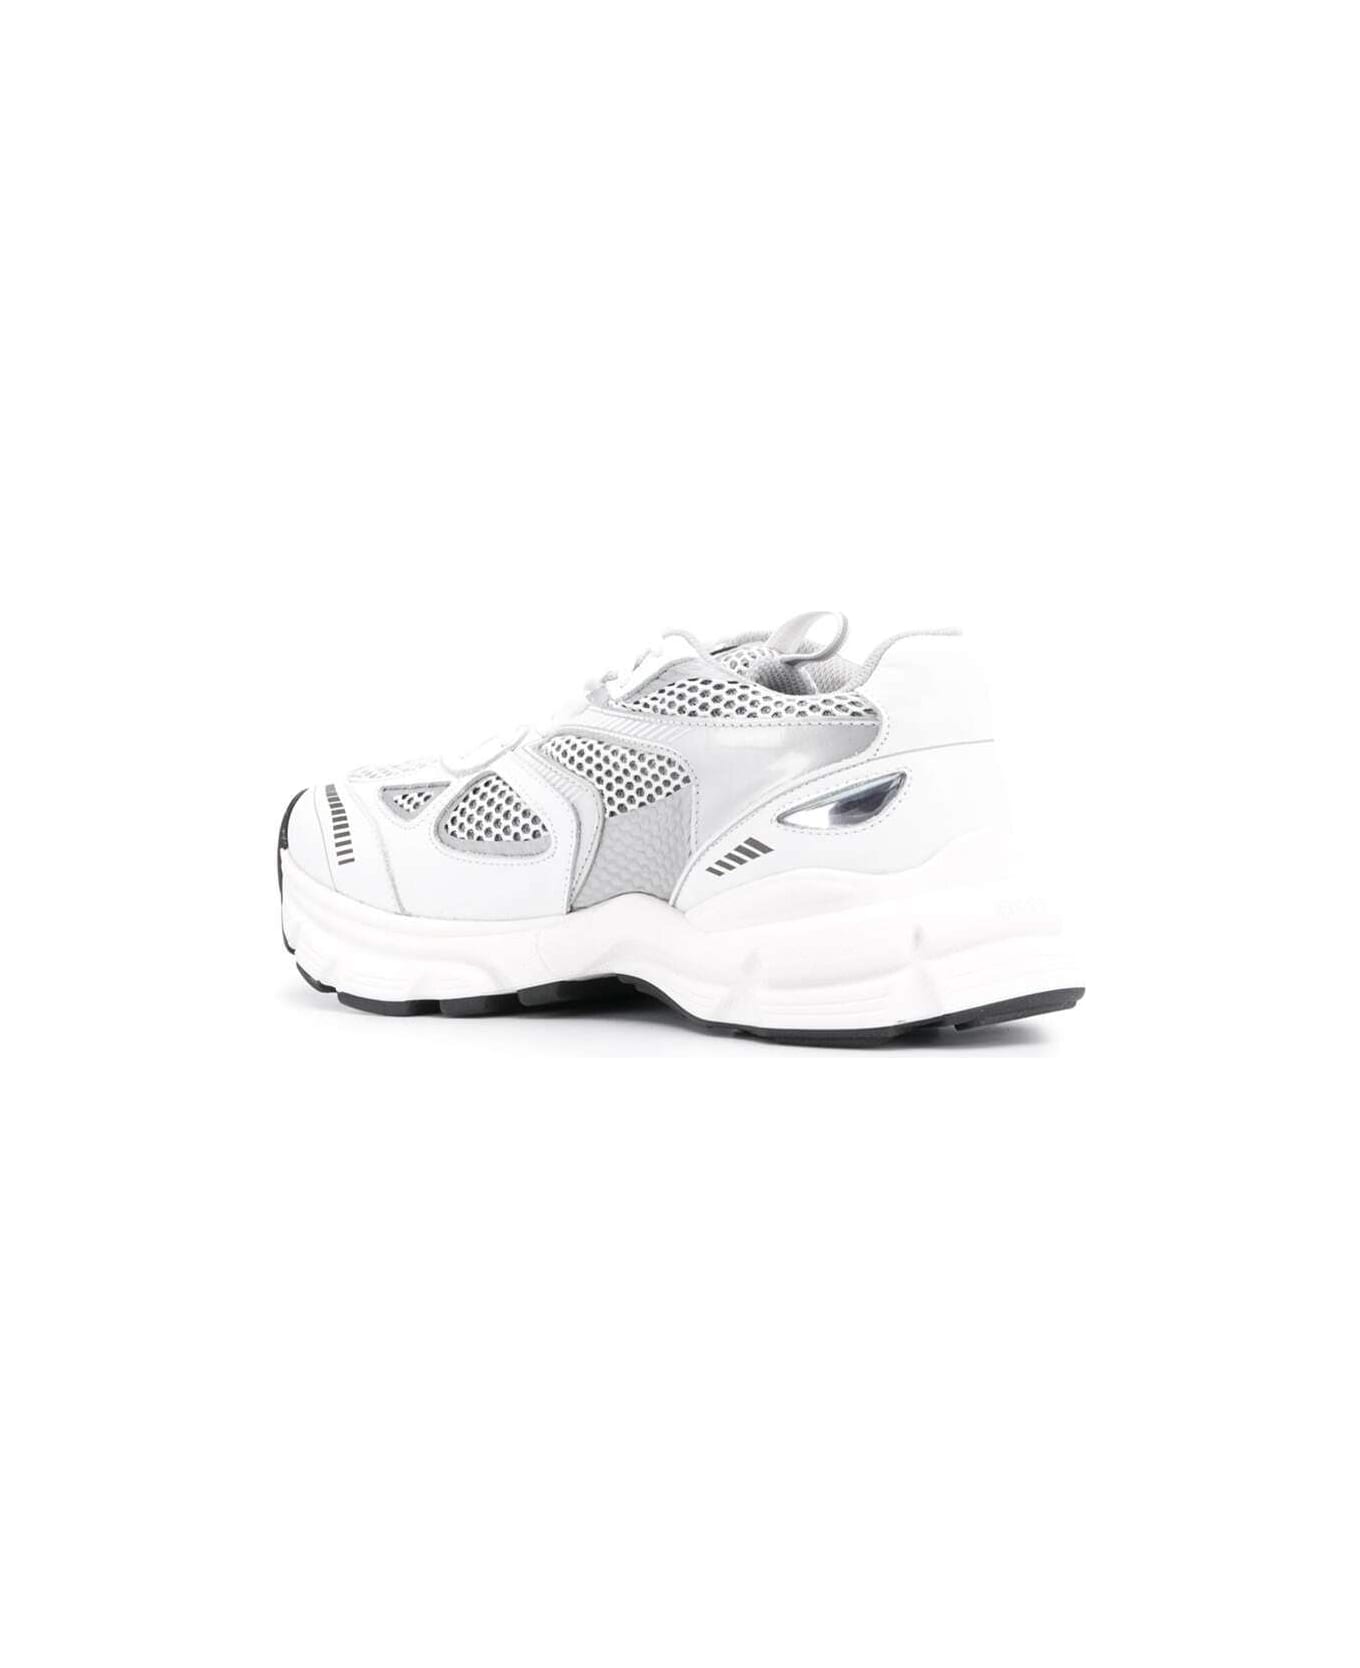 Axel Arigato Marathon Runner Recycled Rubber And Leather Sneakers Axel Arigato Woman - White